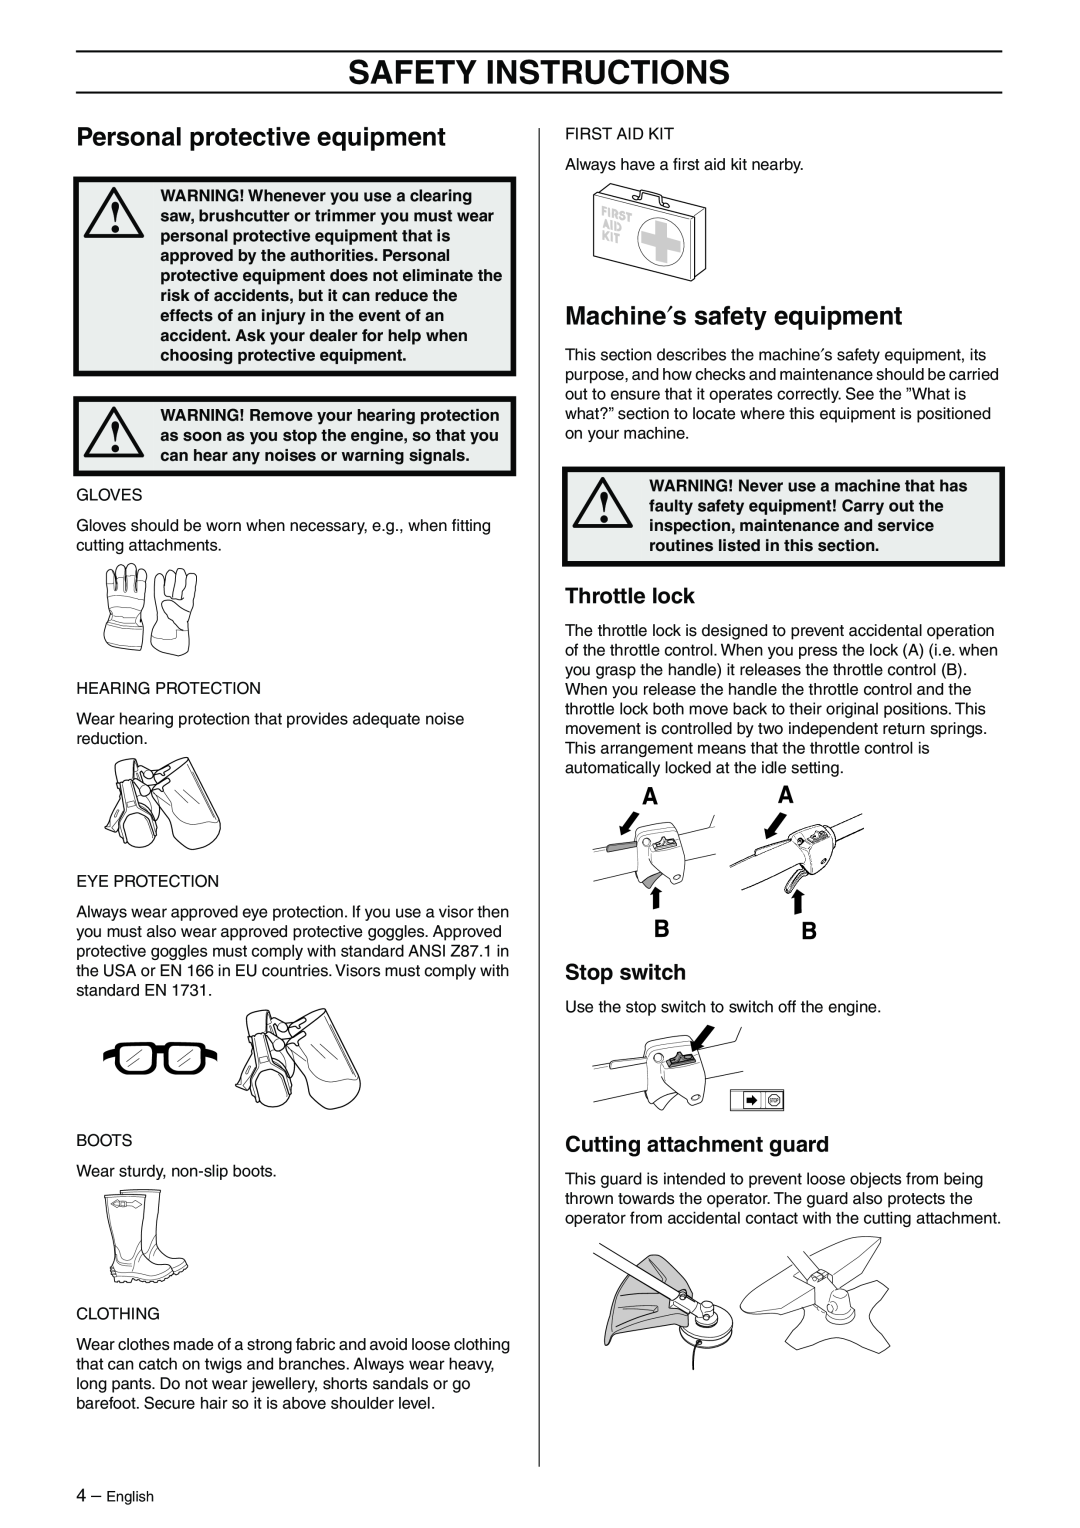 Husqvarna 325RJ manual Safety Instructions, Personal protective equipment, Machine′s safety equipment 